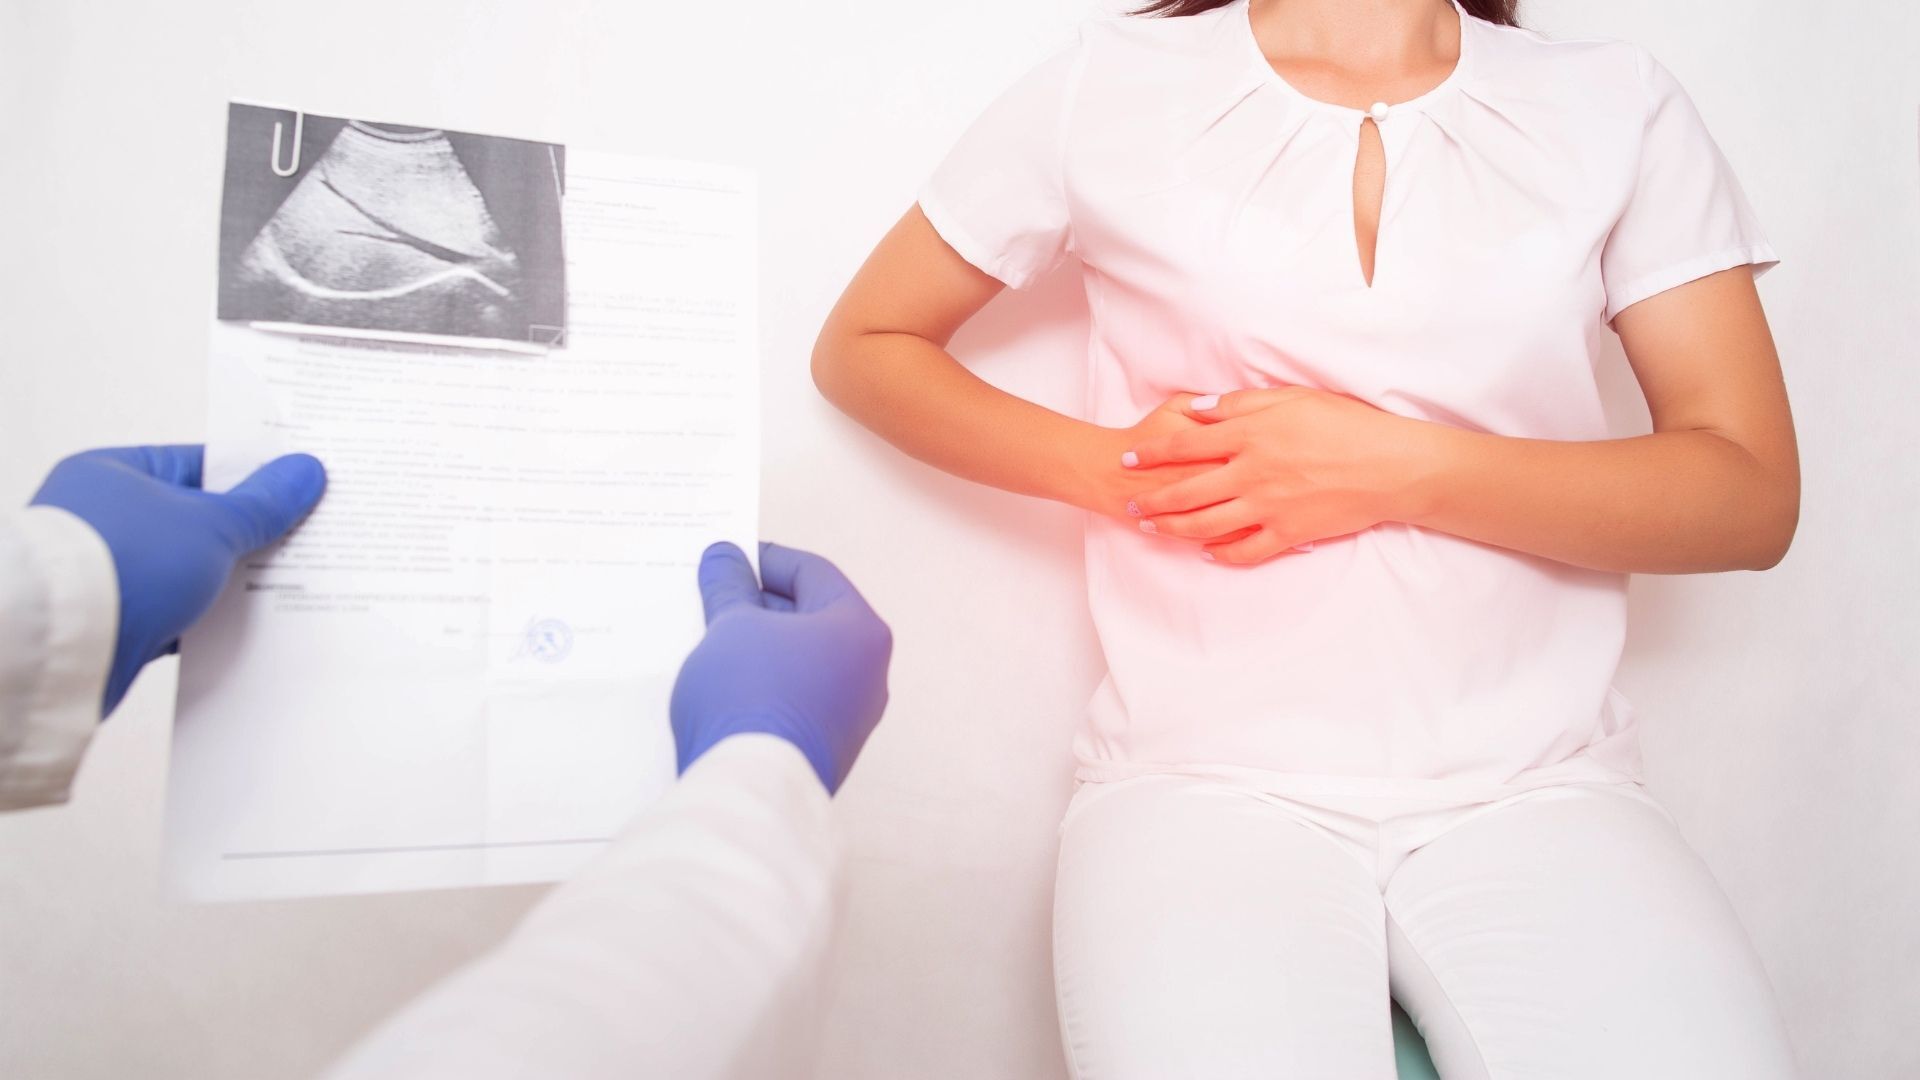 Getting Ahead: What are the First Signs of a Bad Gallbladder?